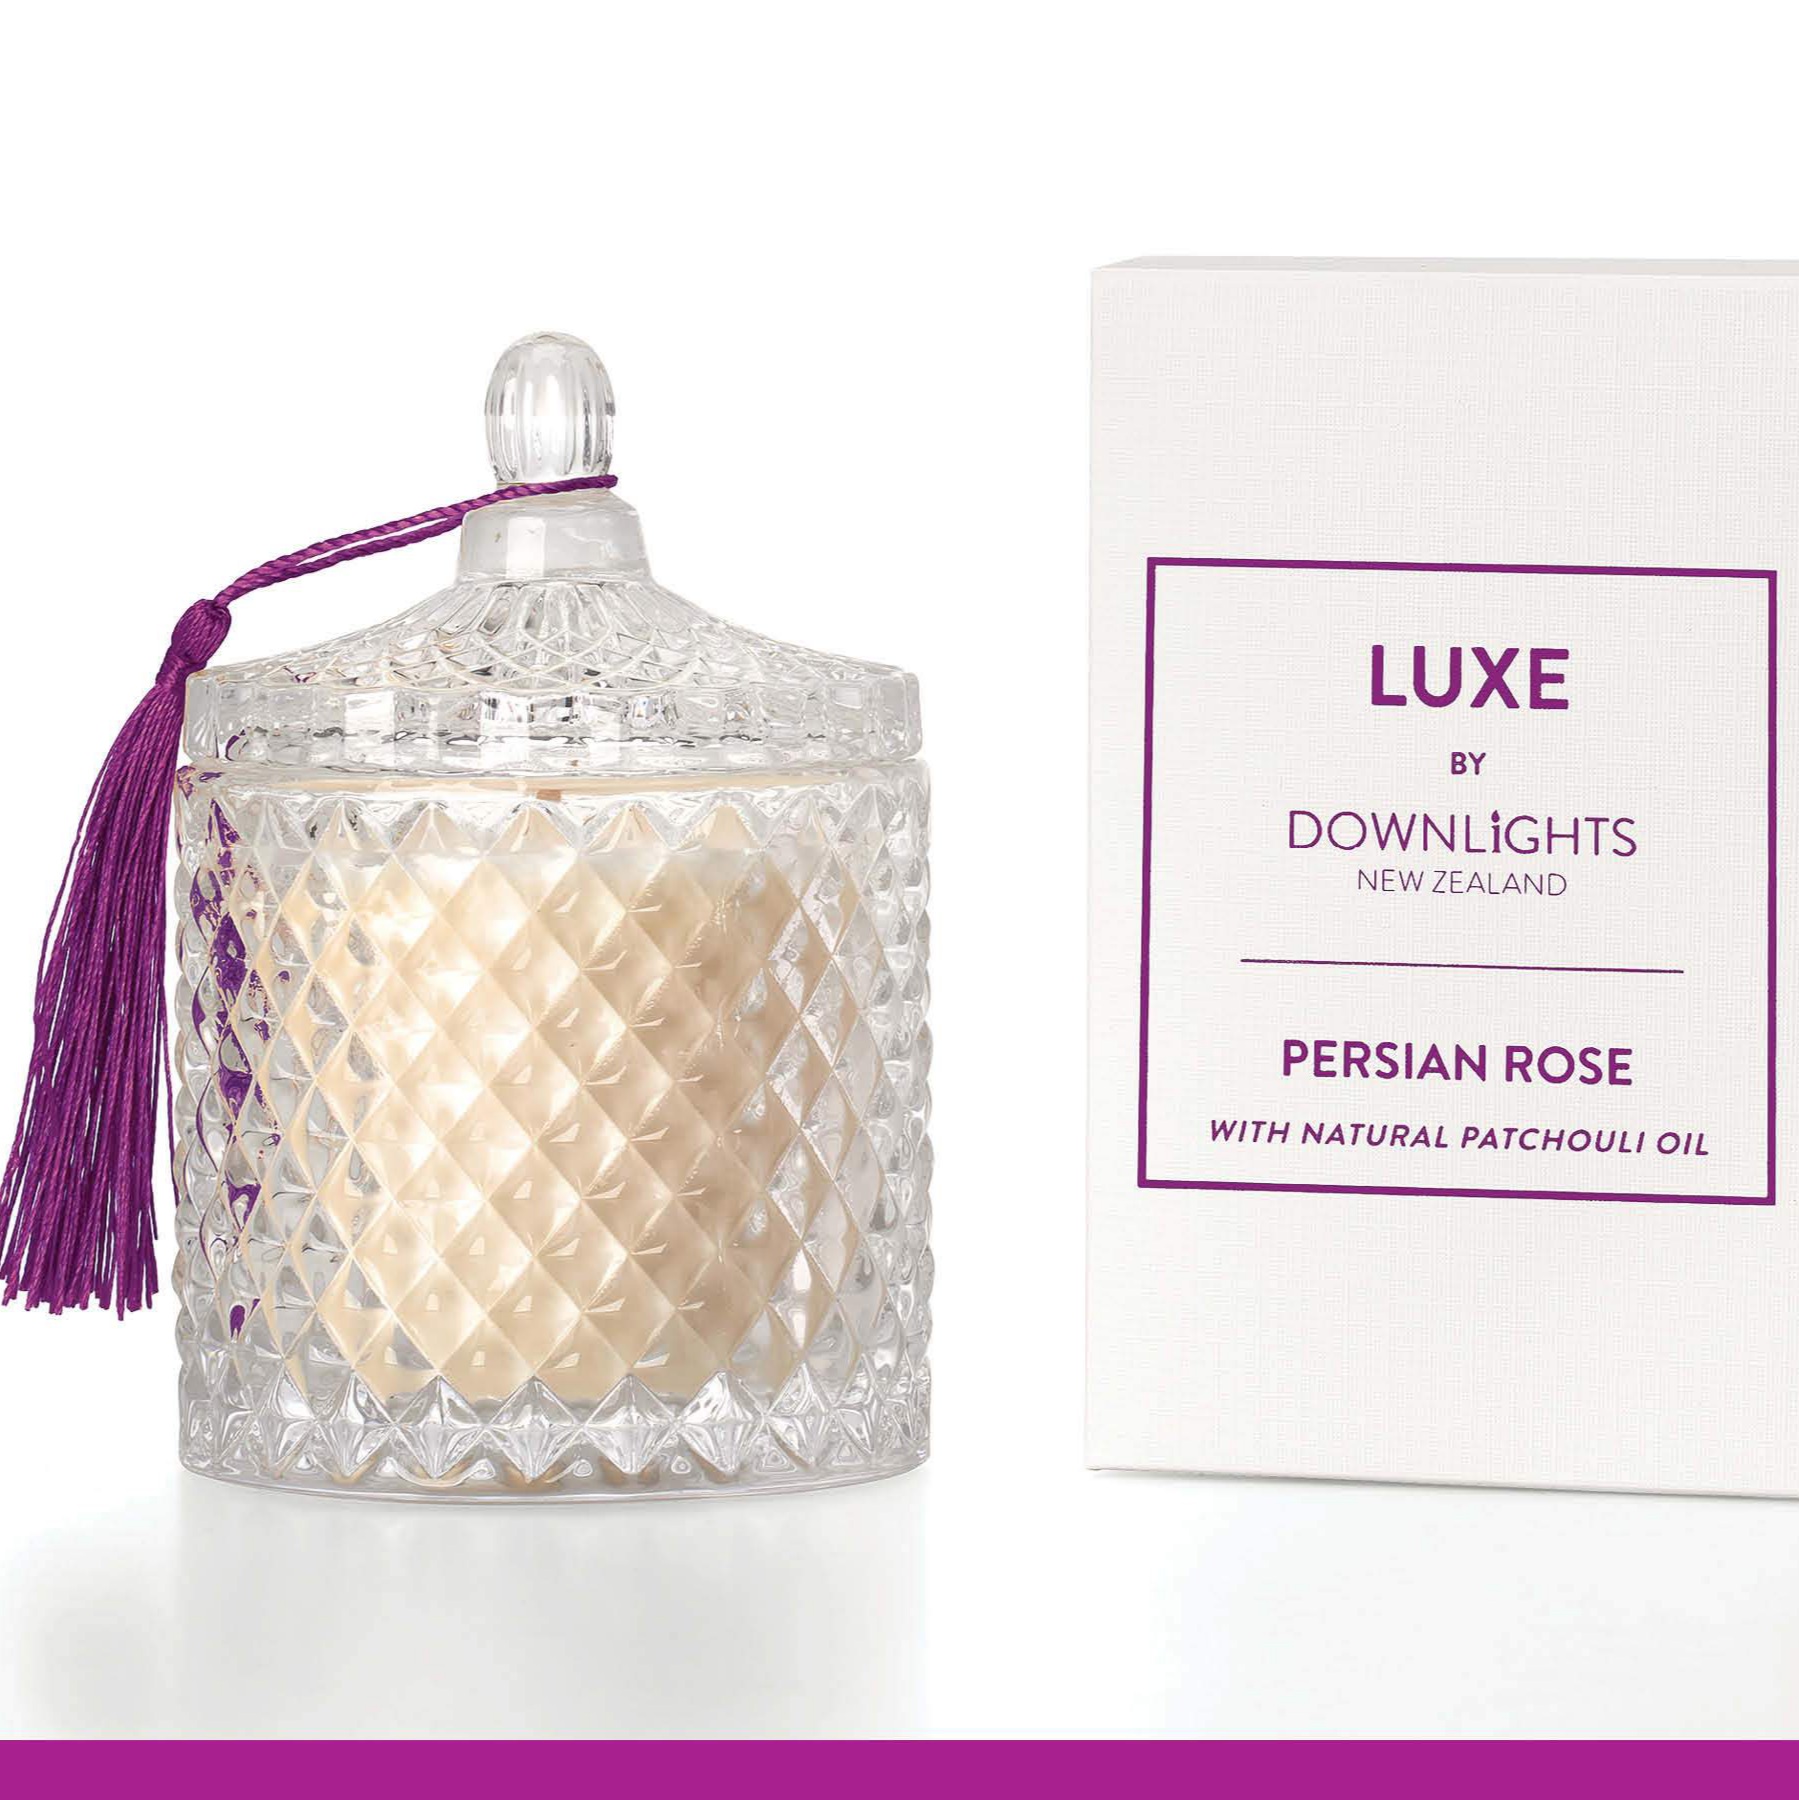 Downlights - Persian Rose Luxe Candle